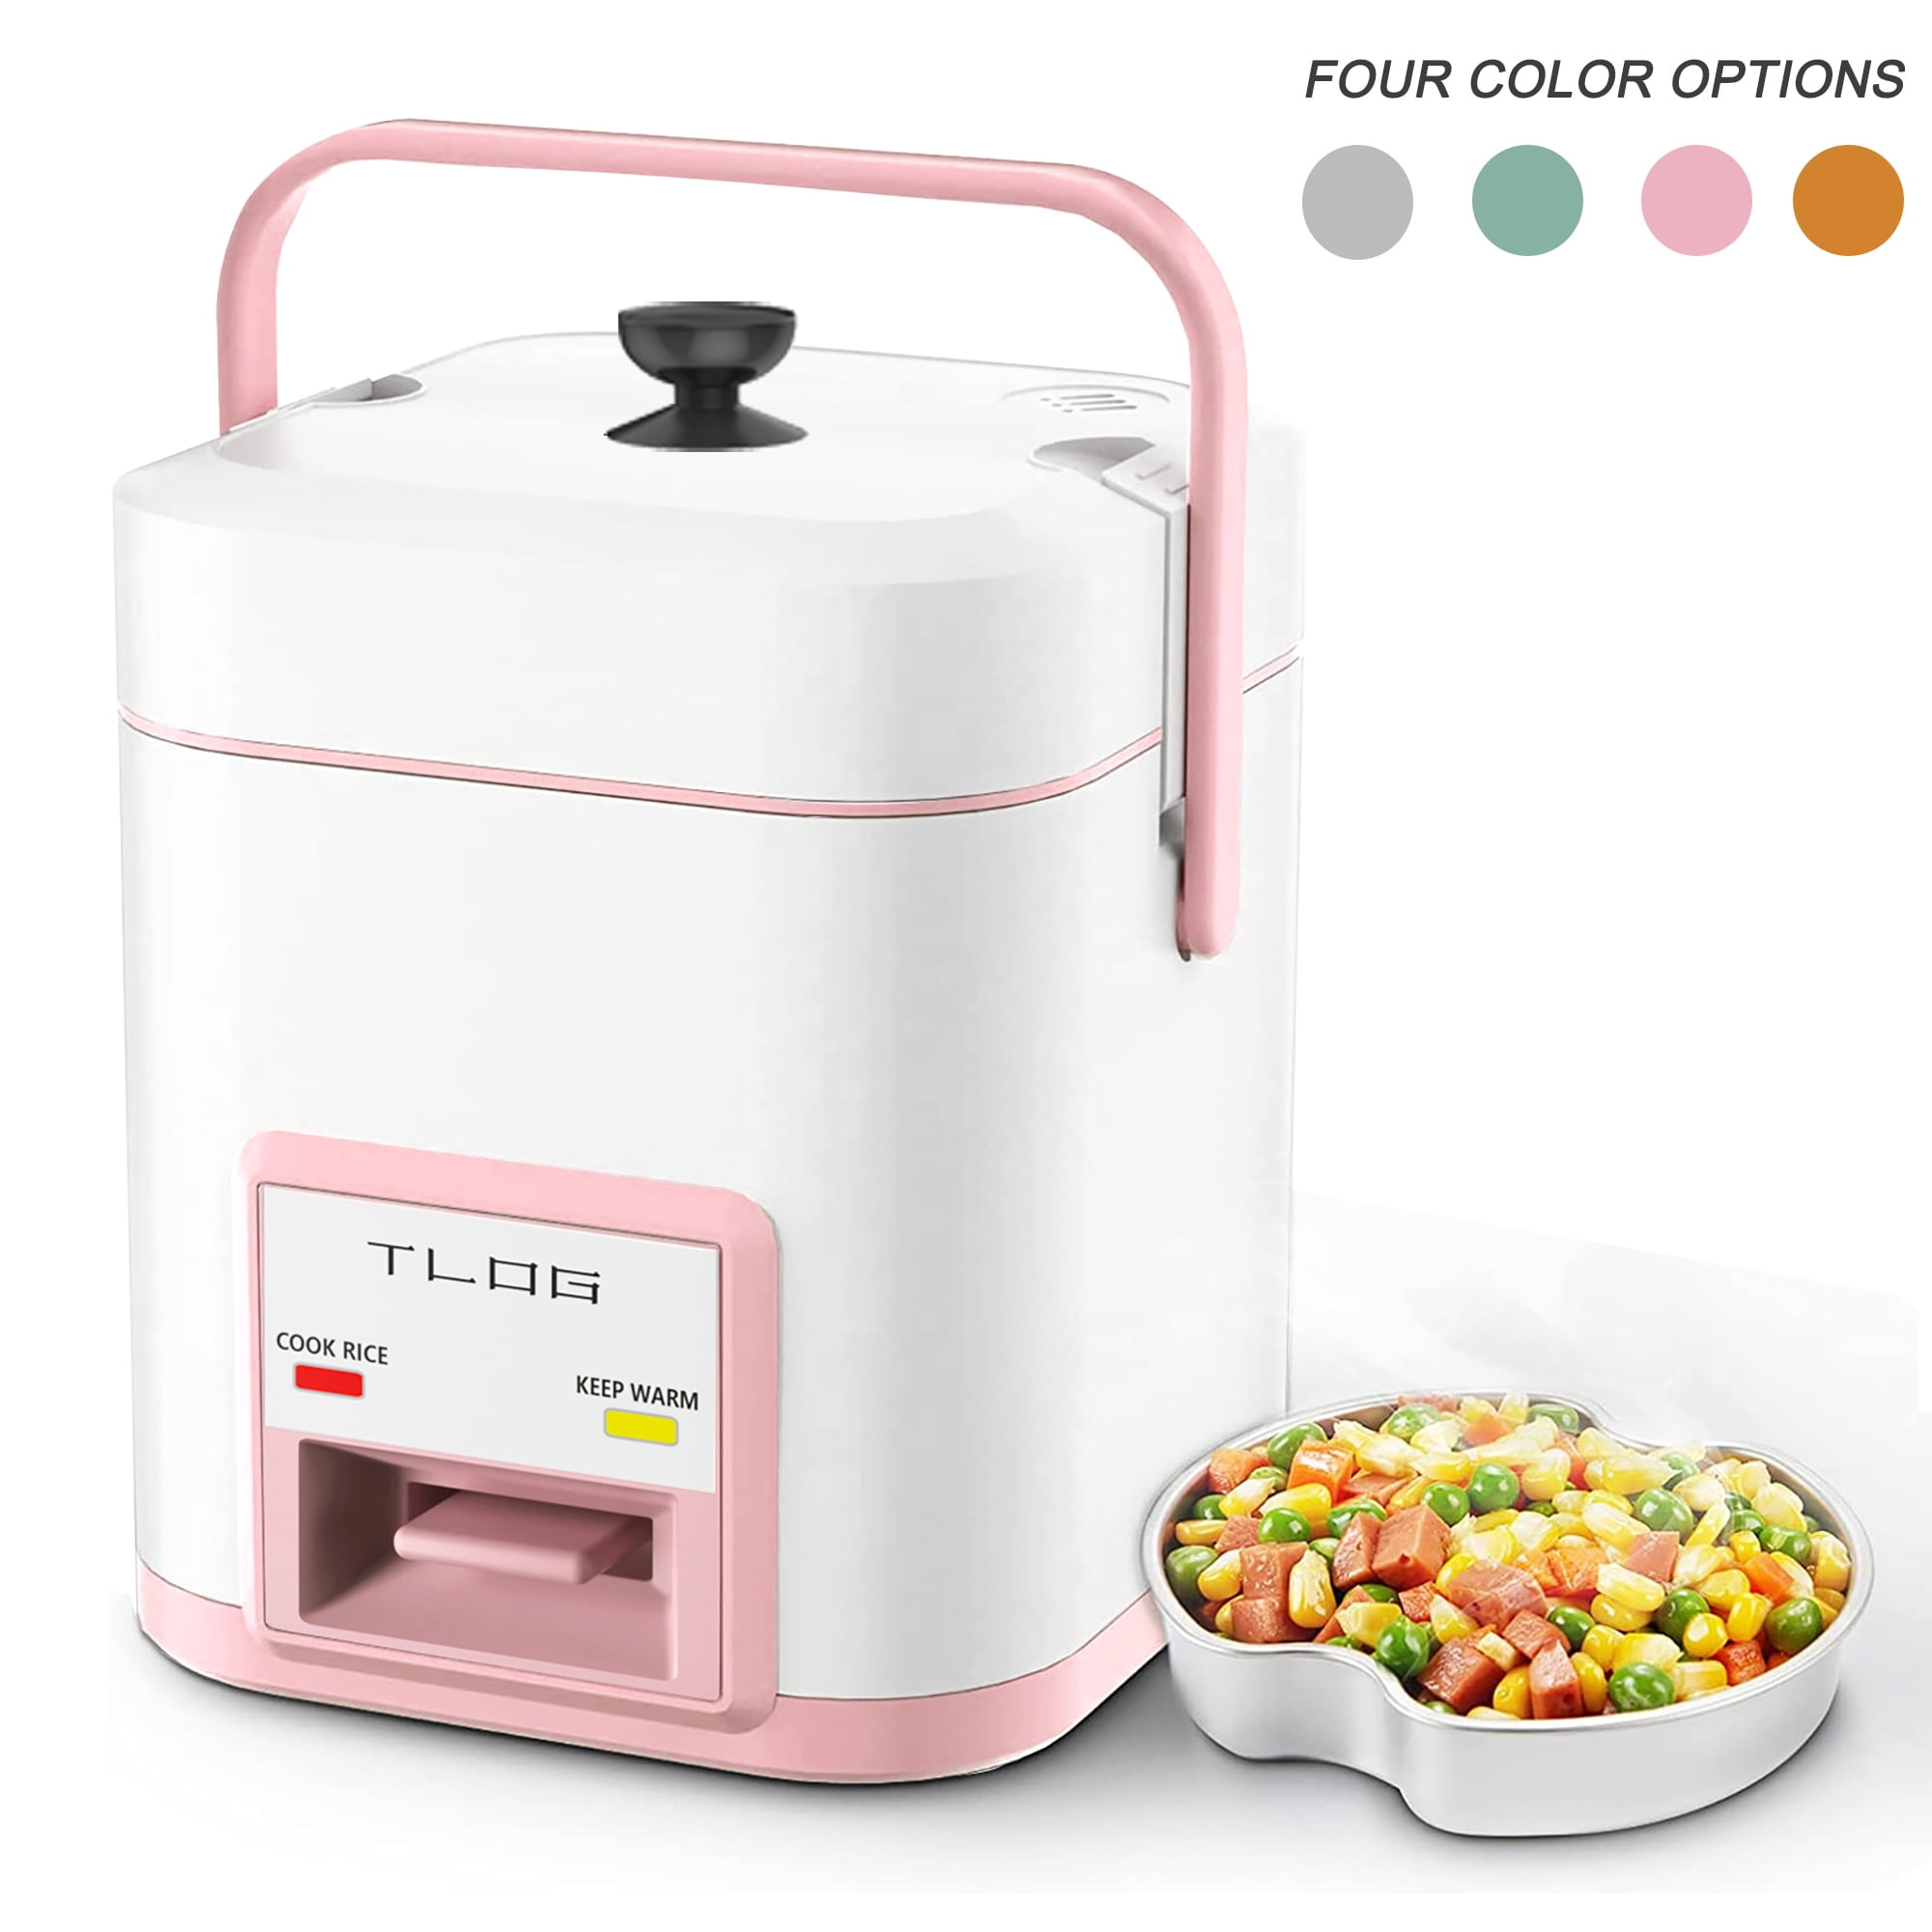 TLOG 5 Cup (Cooked) Mini Rice Cooker 1.2L Portable with Steam Tray Pink